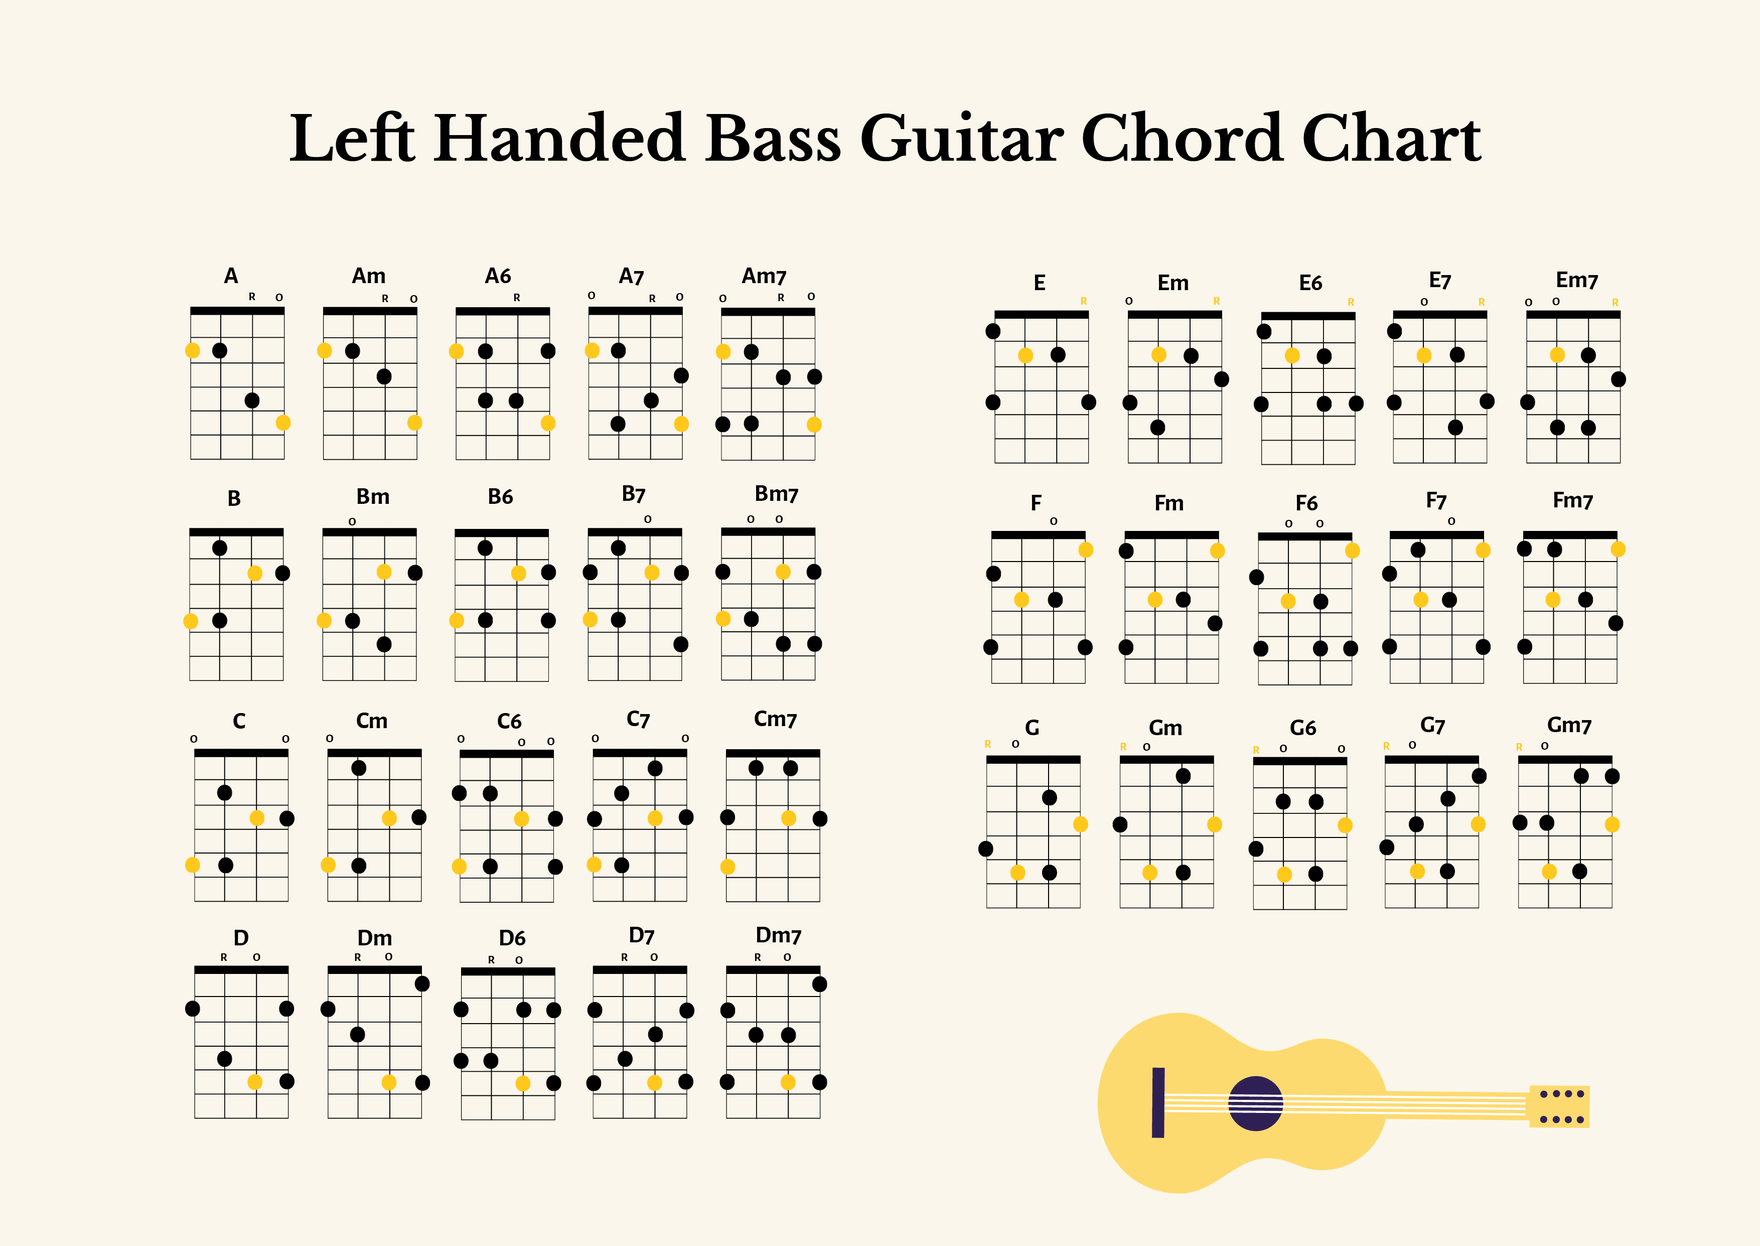 Chord Chart Template in PDF